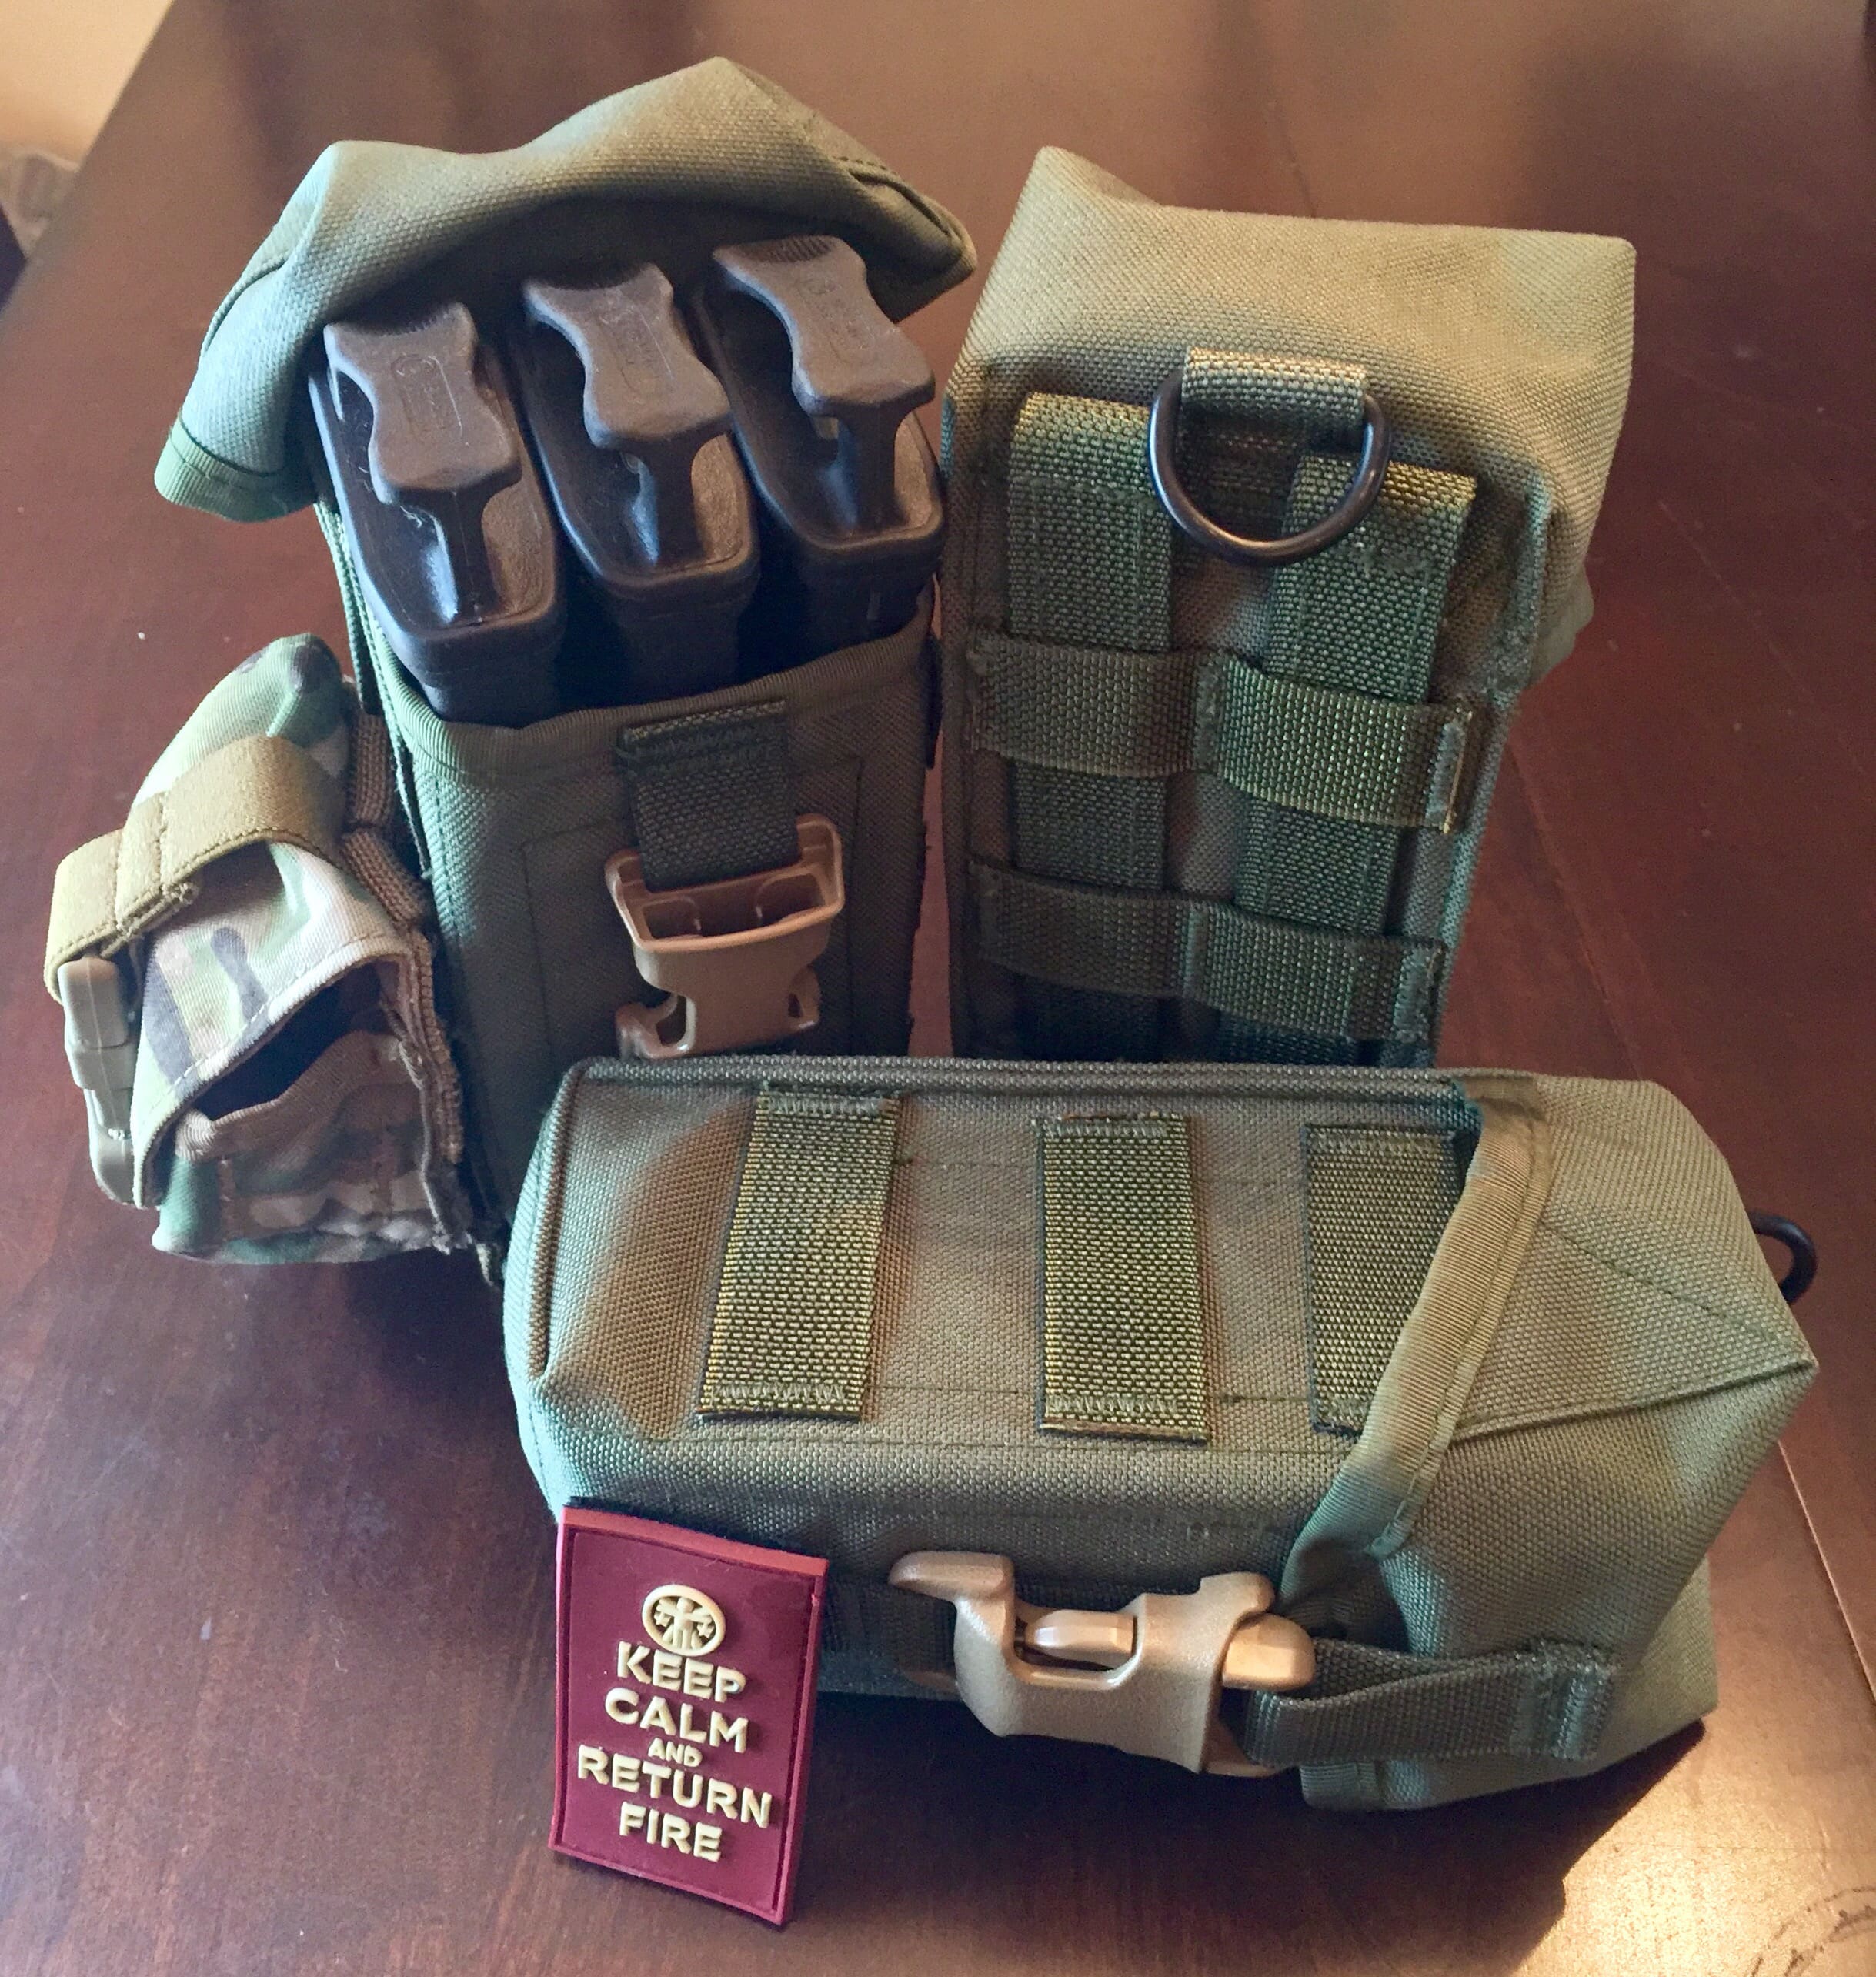 Velcro magazine pouch for M4 magazines to attach to the equipment